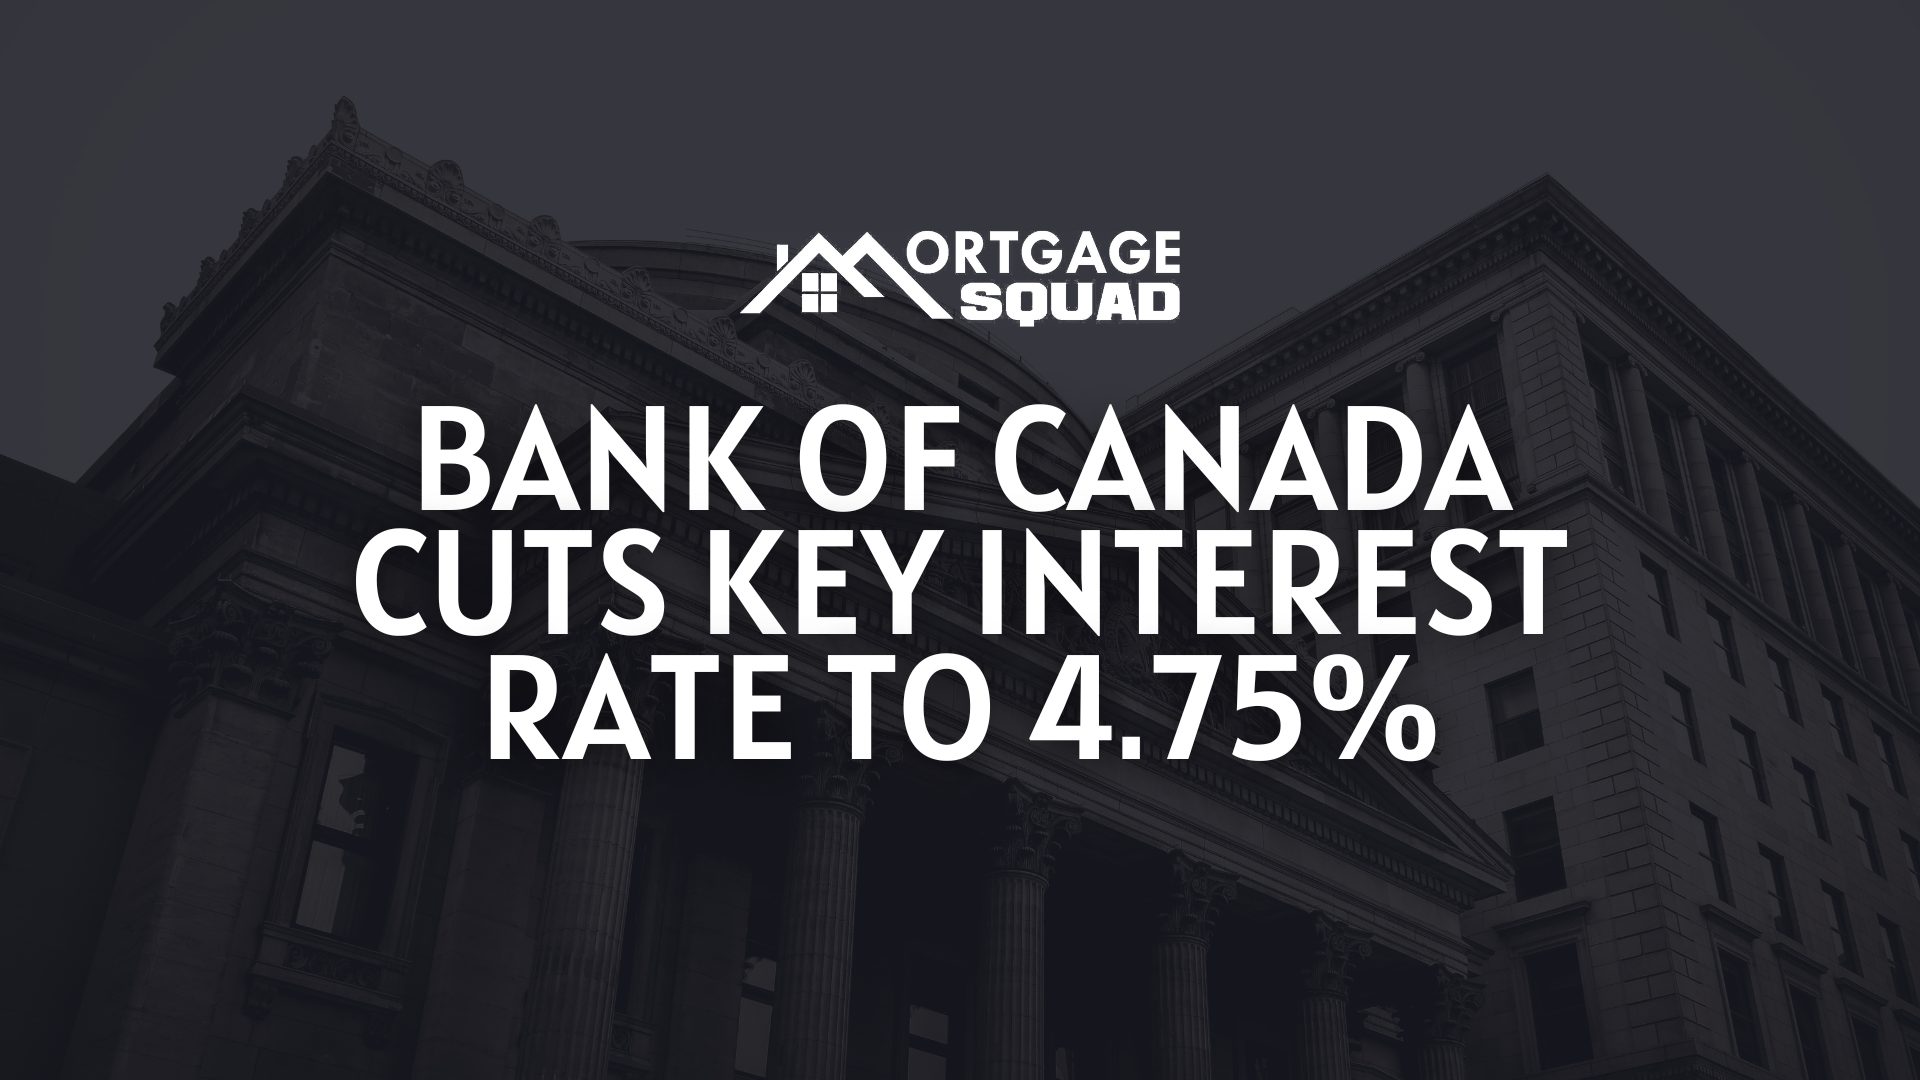 Bank of Canada cuts key interest rate to 4.75%